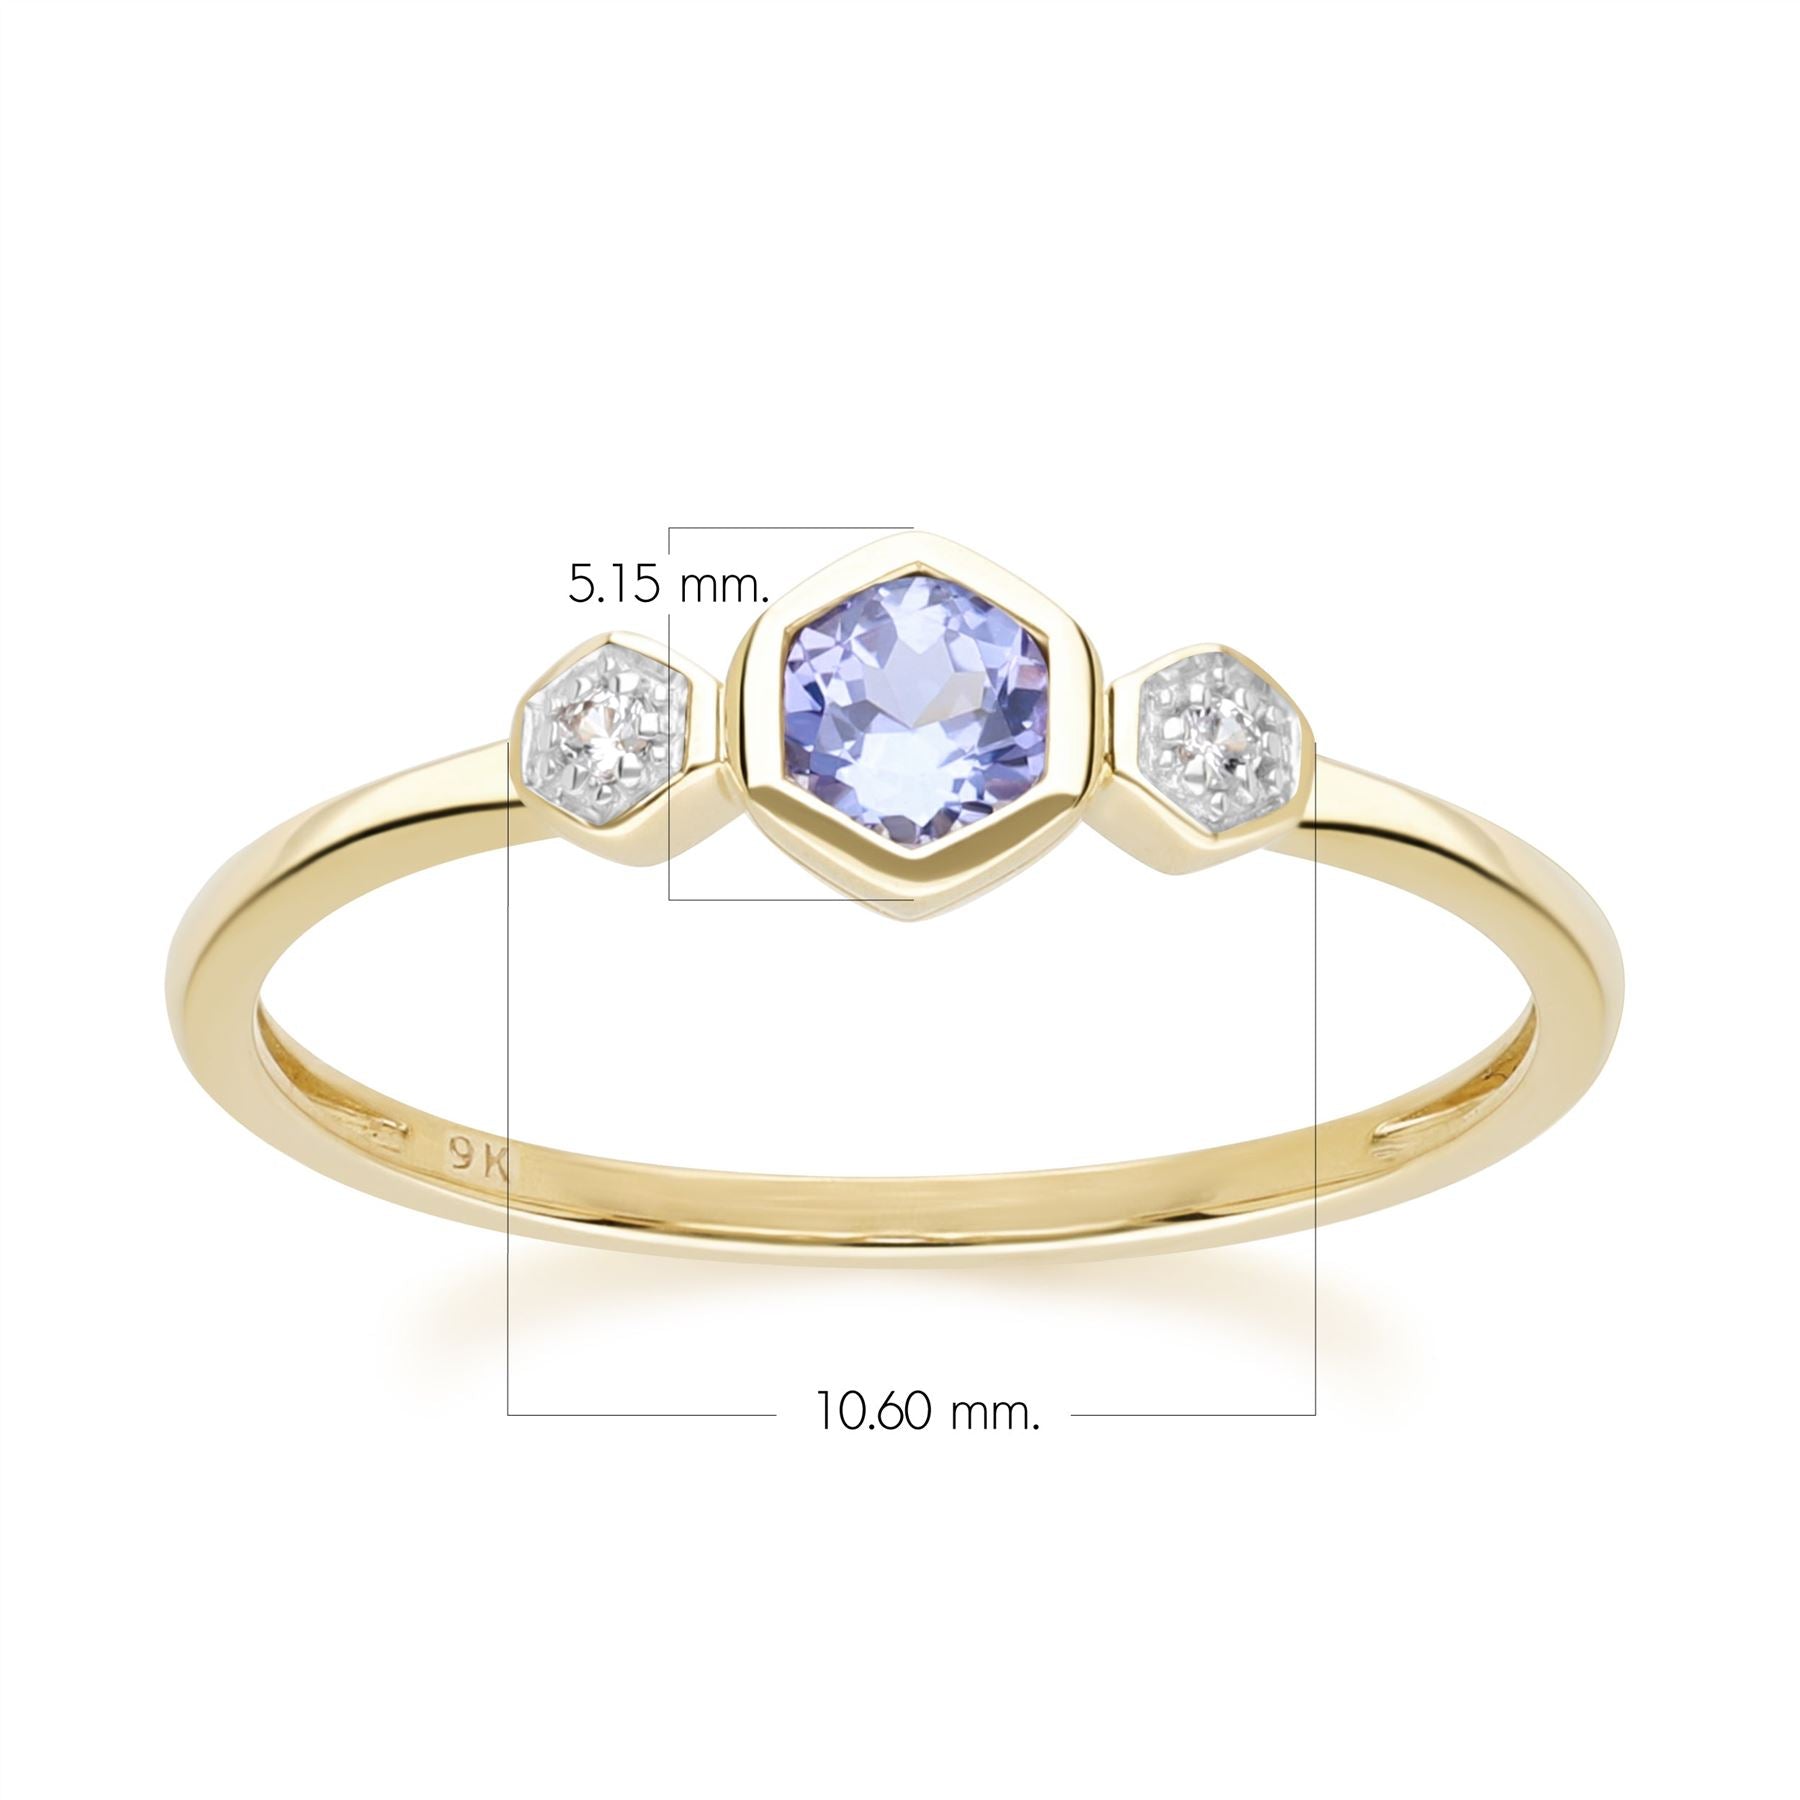 Geometric Round Tanzanite and Sapphire Ring in 9ct Yellow Gold Dimensions 